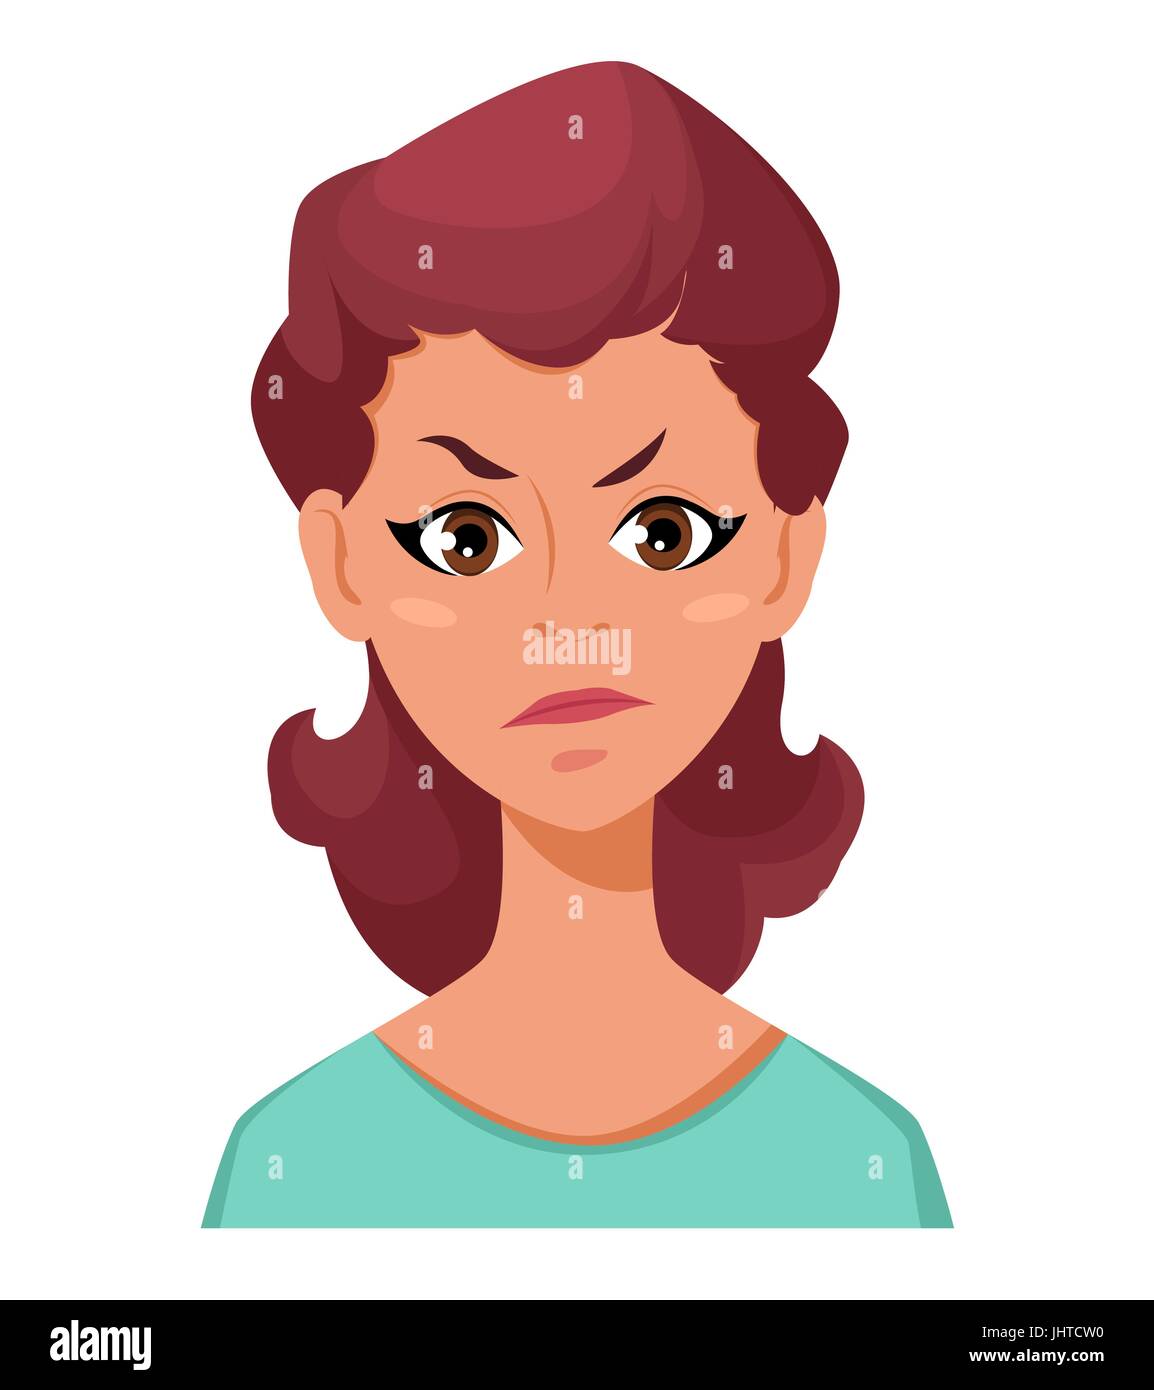 Face expression of a woman - dissatisfied, angry. Female emotions. Attractive cartoon character. Vector illustration isolated on white background. Stock Vector